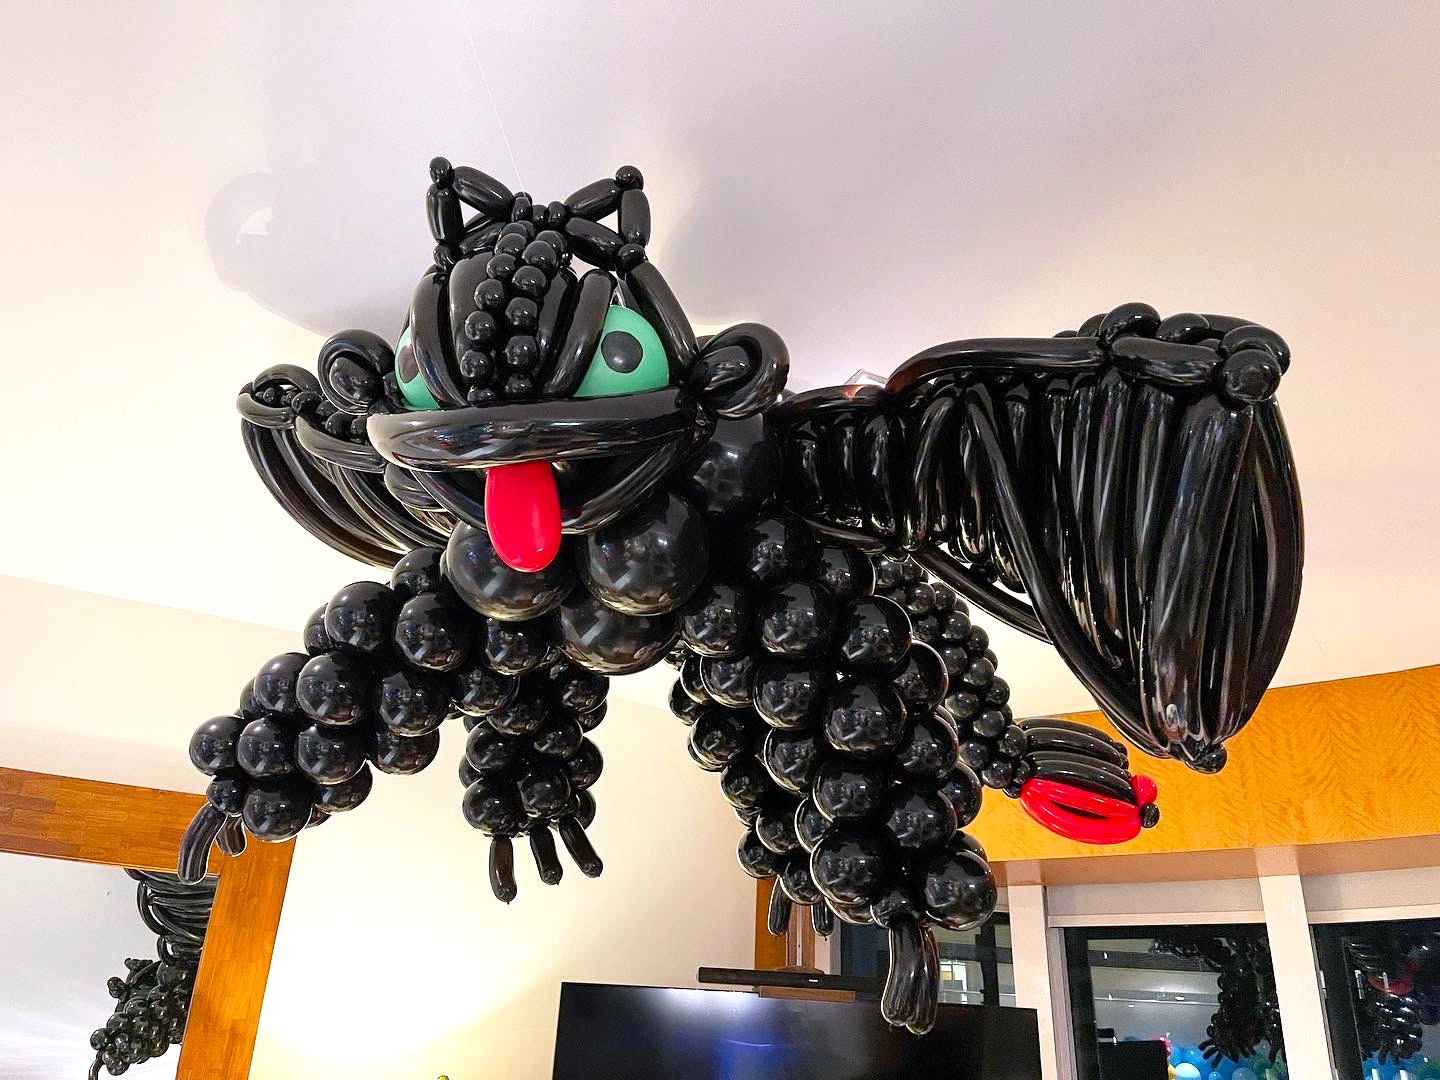 Balloon Toothless Dragon Sculpture on Ceiling Singapore